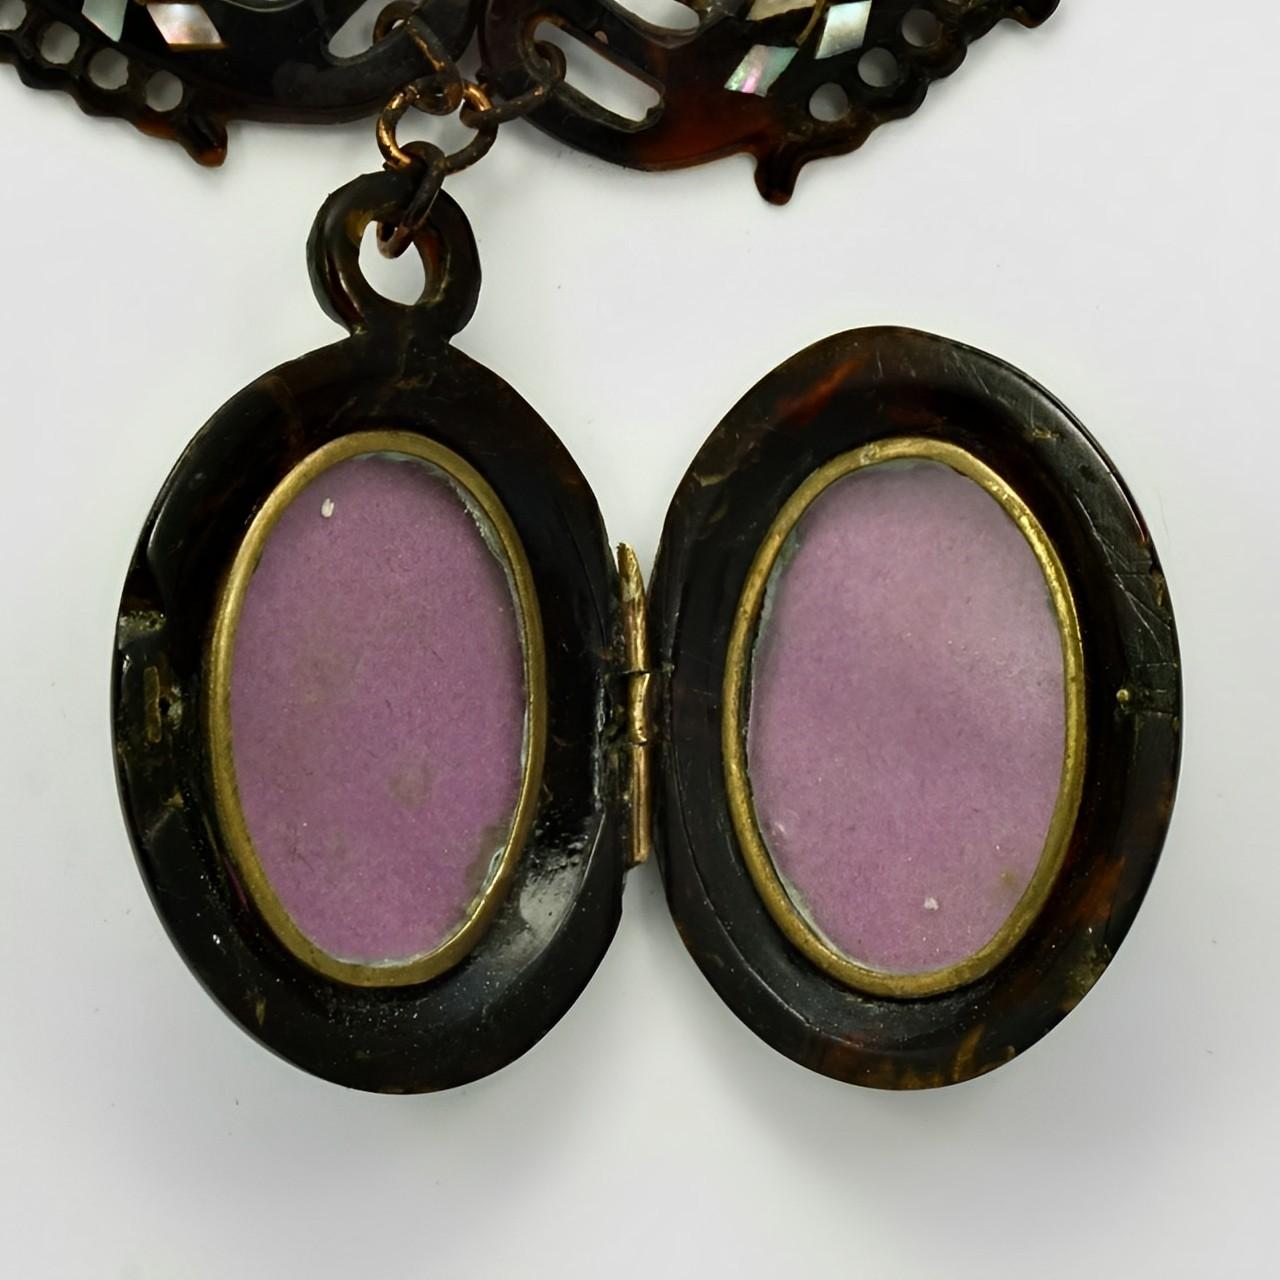 Antique Tortoiseshell Necklace Locket with Gold and Mother of Pearl Piqué  1